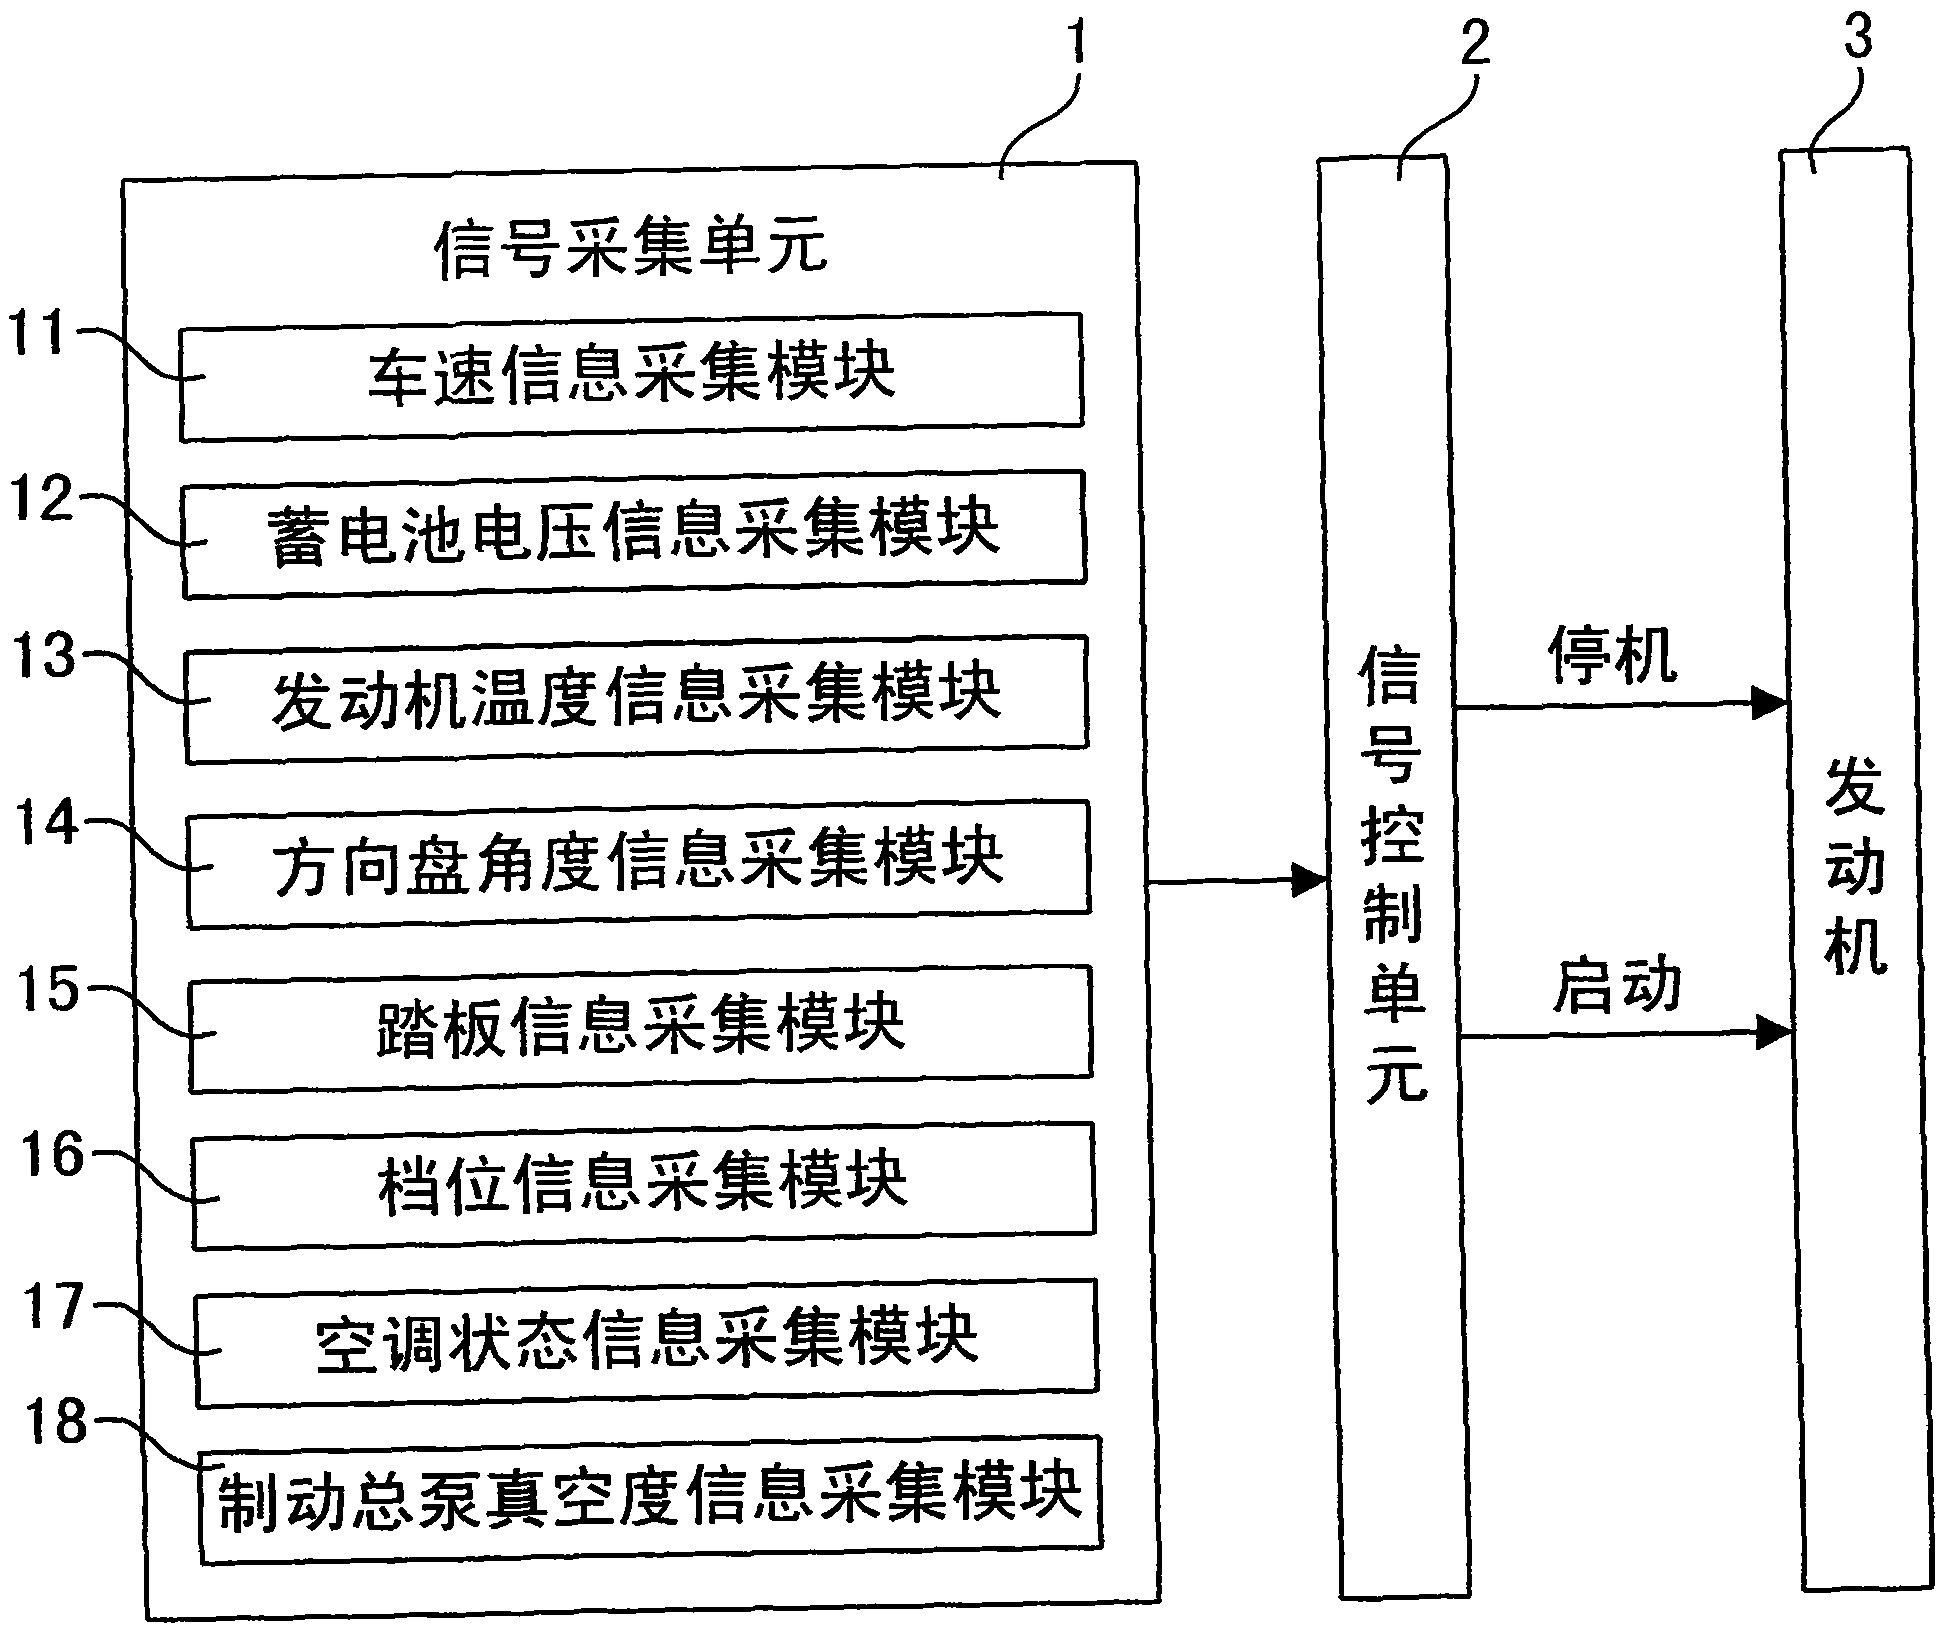 Vehicle engine high-speed starting and stopping control method and system based on active shutdown mode